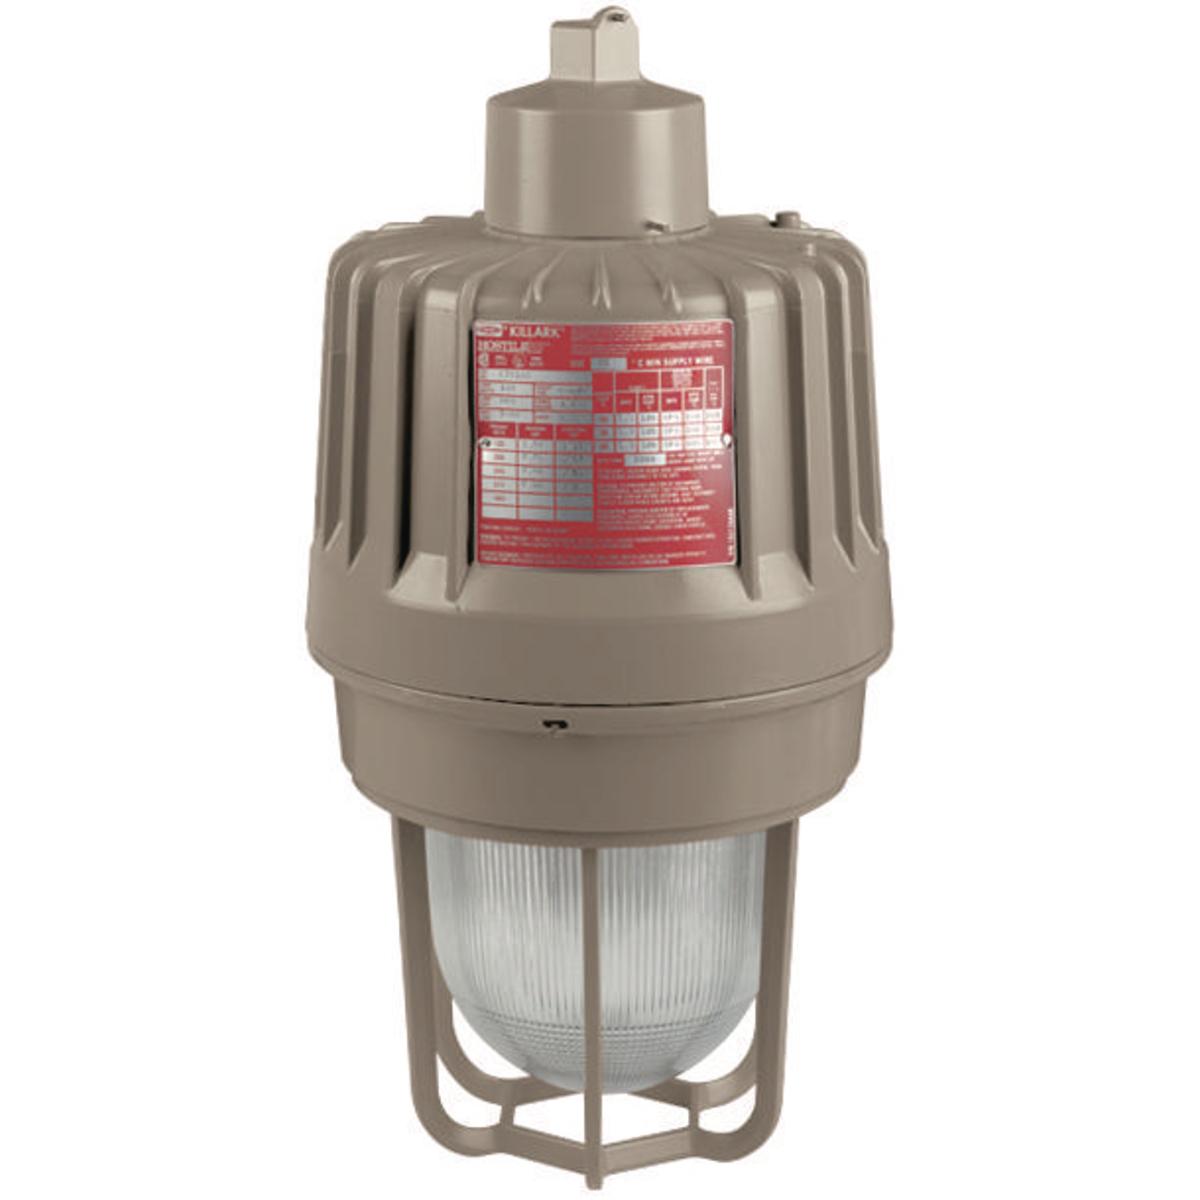 Hubbell EZS400A3 HID 400W Quadri-Volt High Pressure Sodium 1" Pendant  ; Three light sources – High Pressure Sodium (50-400W), Metal Halide (70-400W) and Pulse Start Metal Halide (175-400W) ; Mounting choice –Pendant, ceiling, 25˚ stanchion or 90˚ wall mount, all with “wi